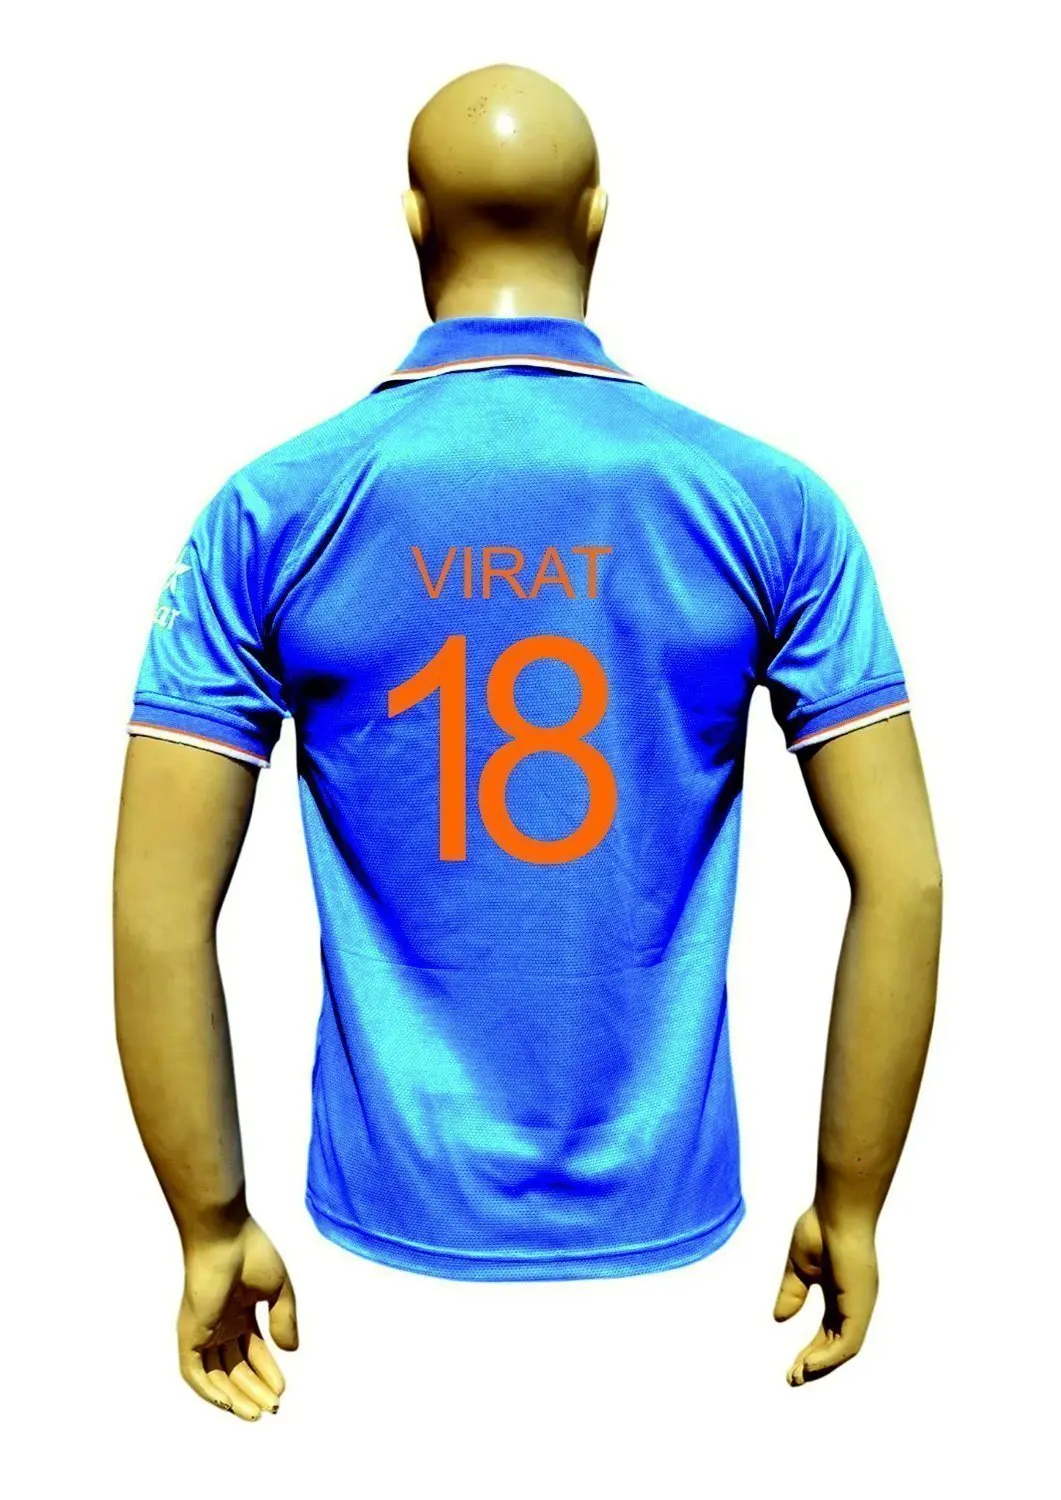 2016 indian cricket jersey